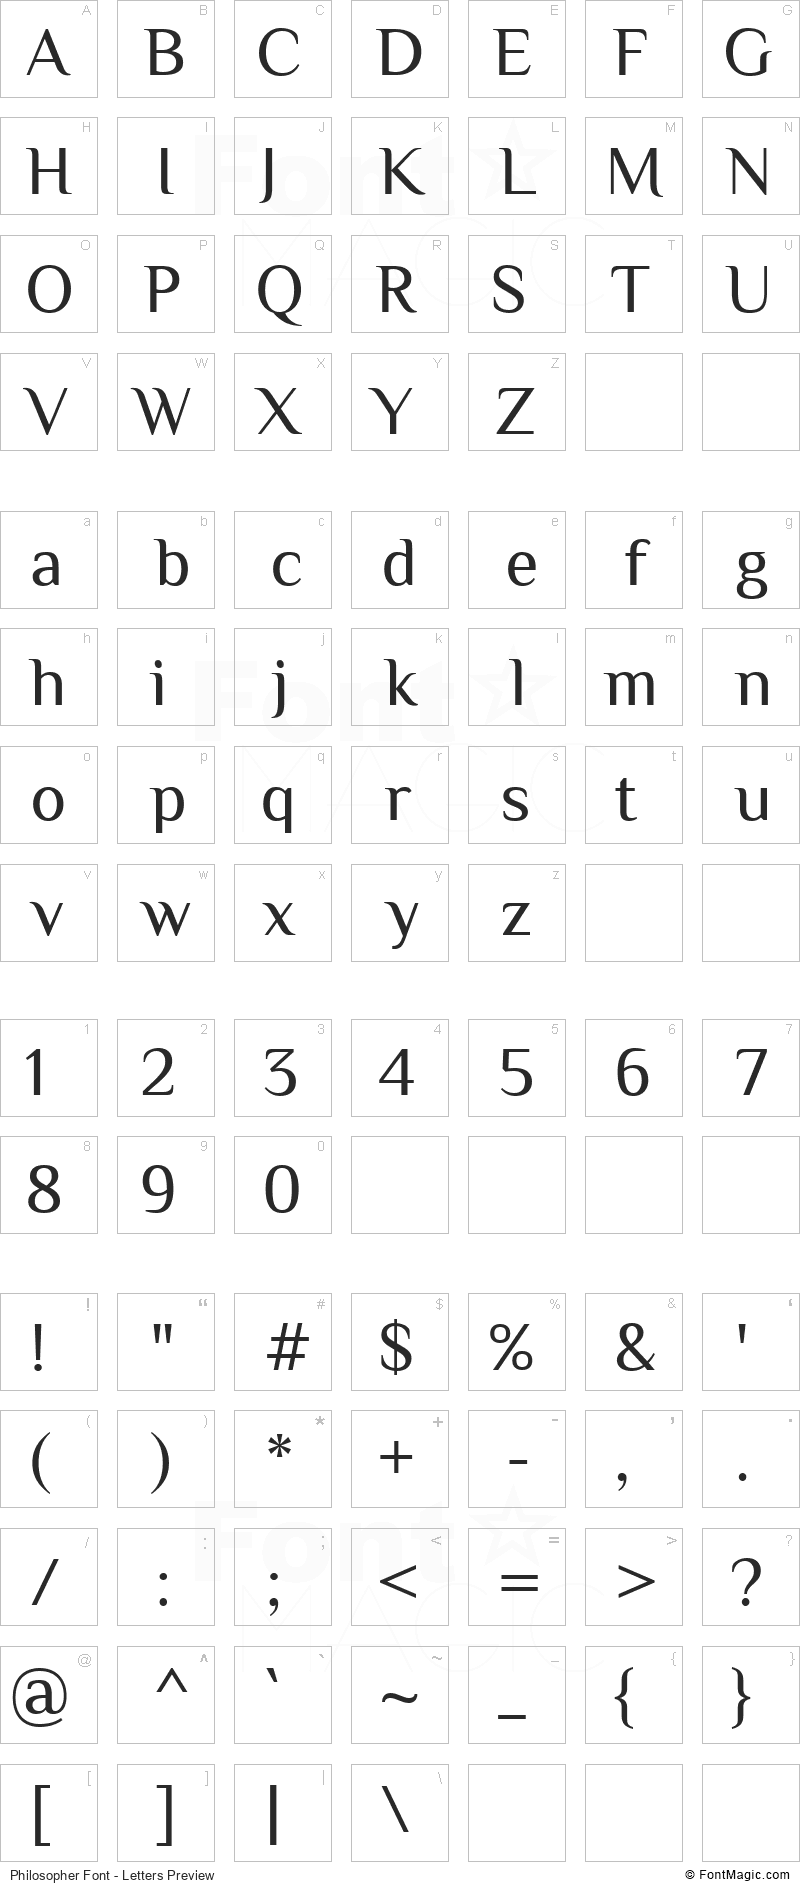 Philosopher Font - All Latters Preview Chart